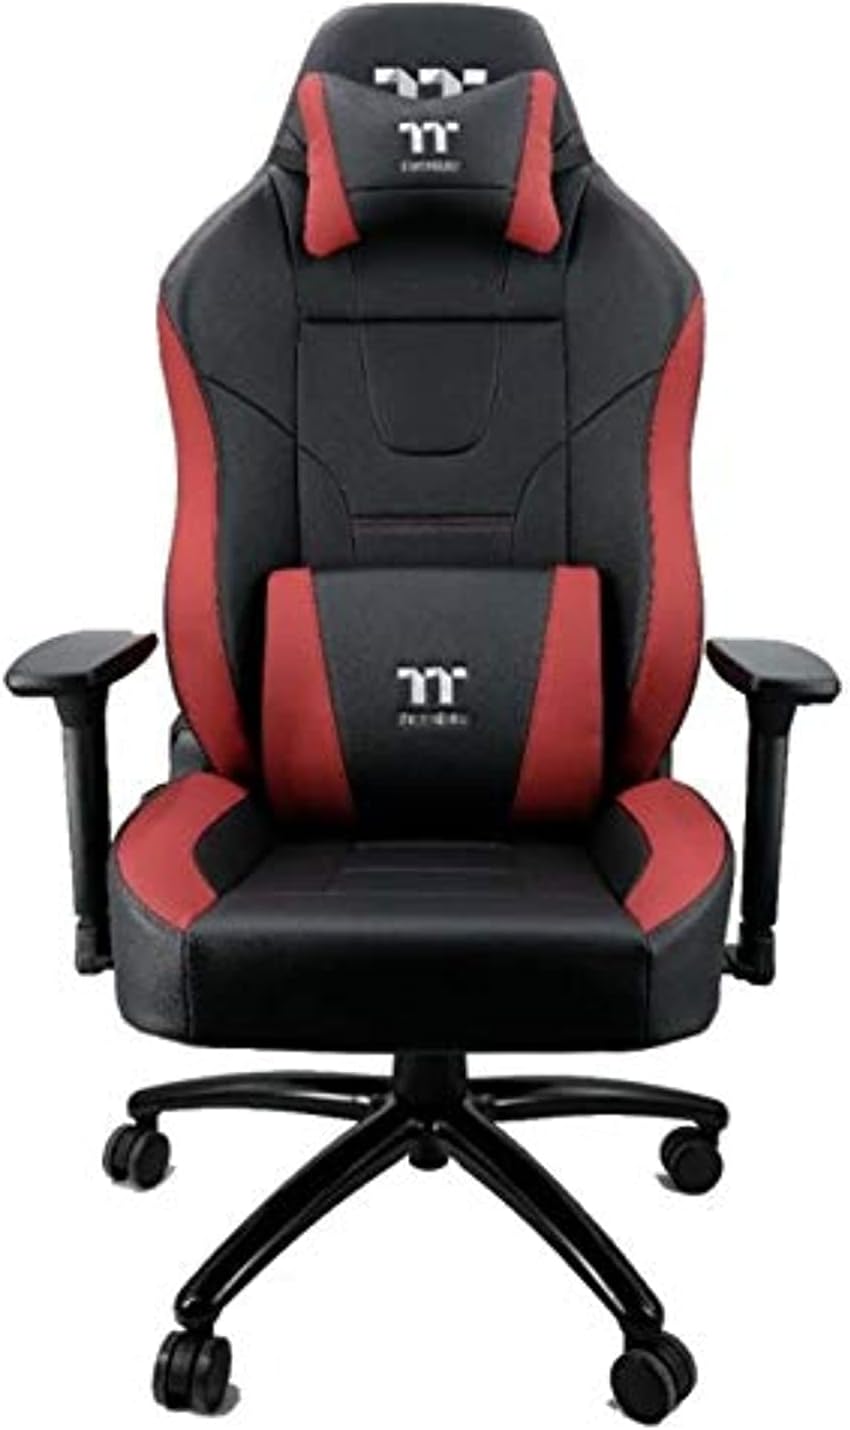 Gaming chair with high-density padding and extensive armrests for unparalleled comfort - Black And Red 4713227526470